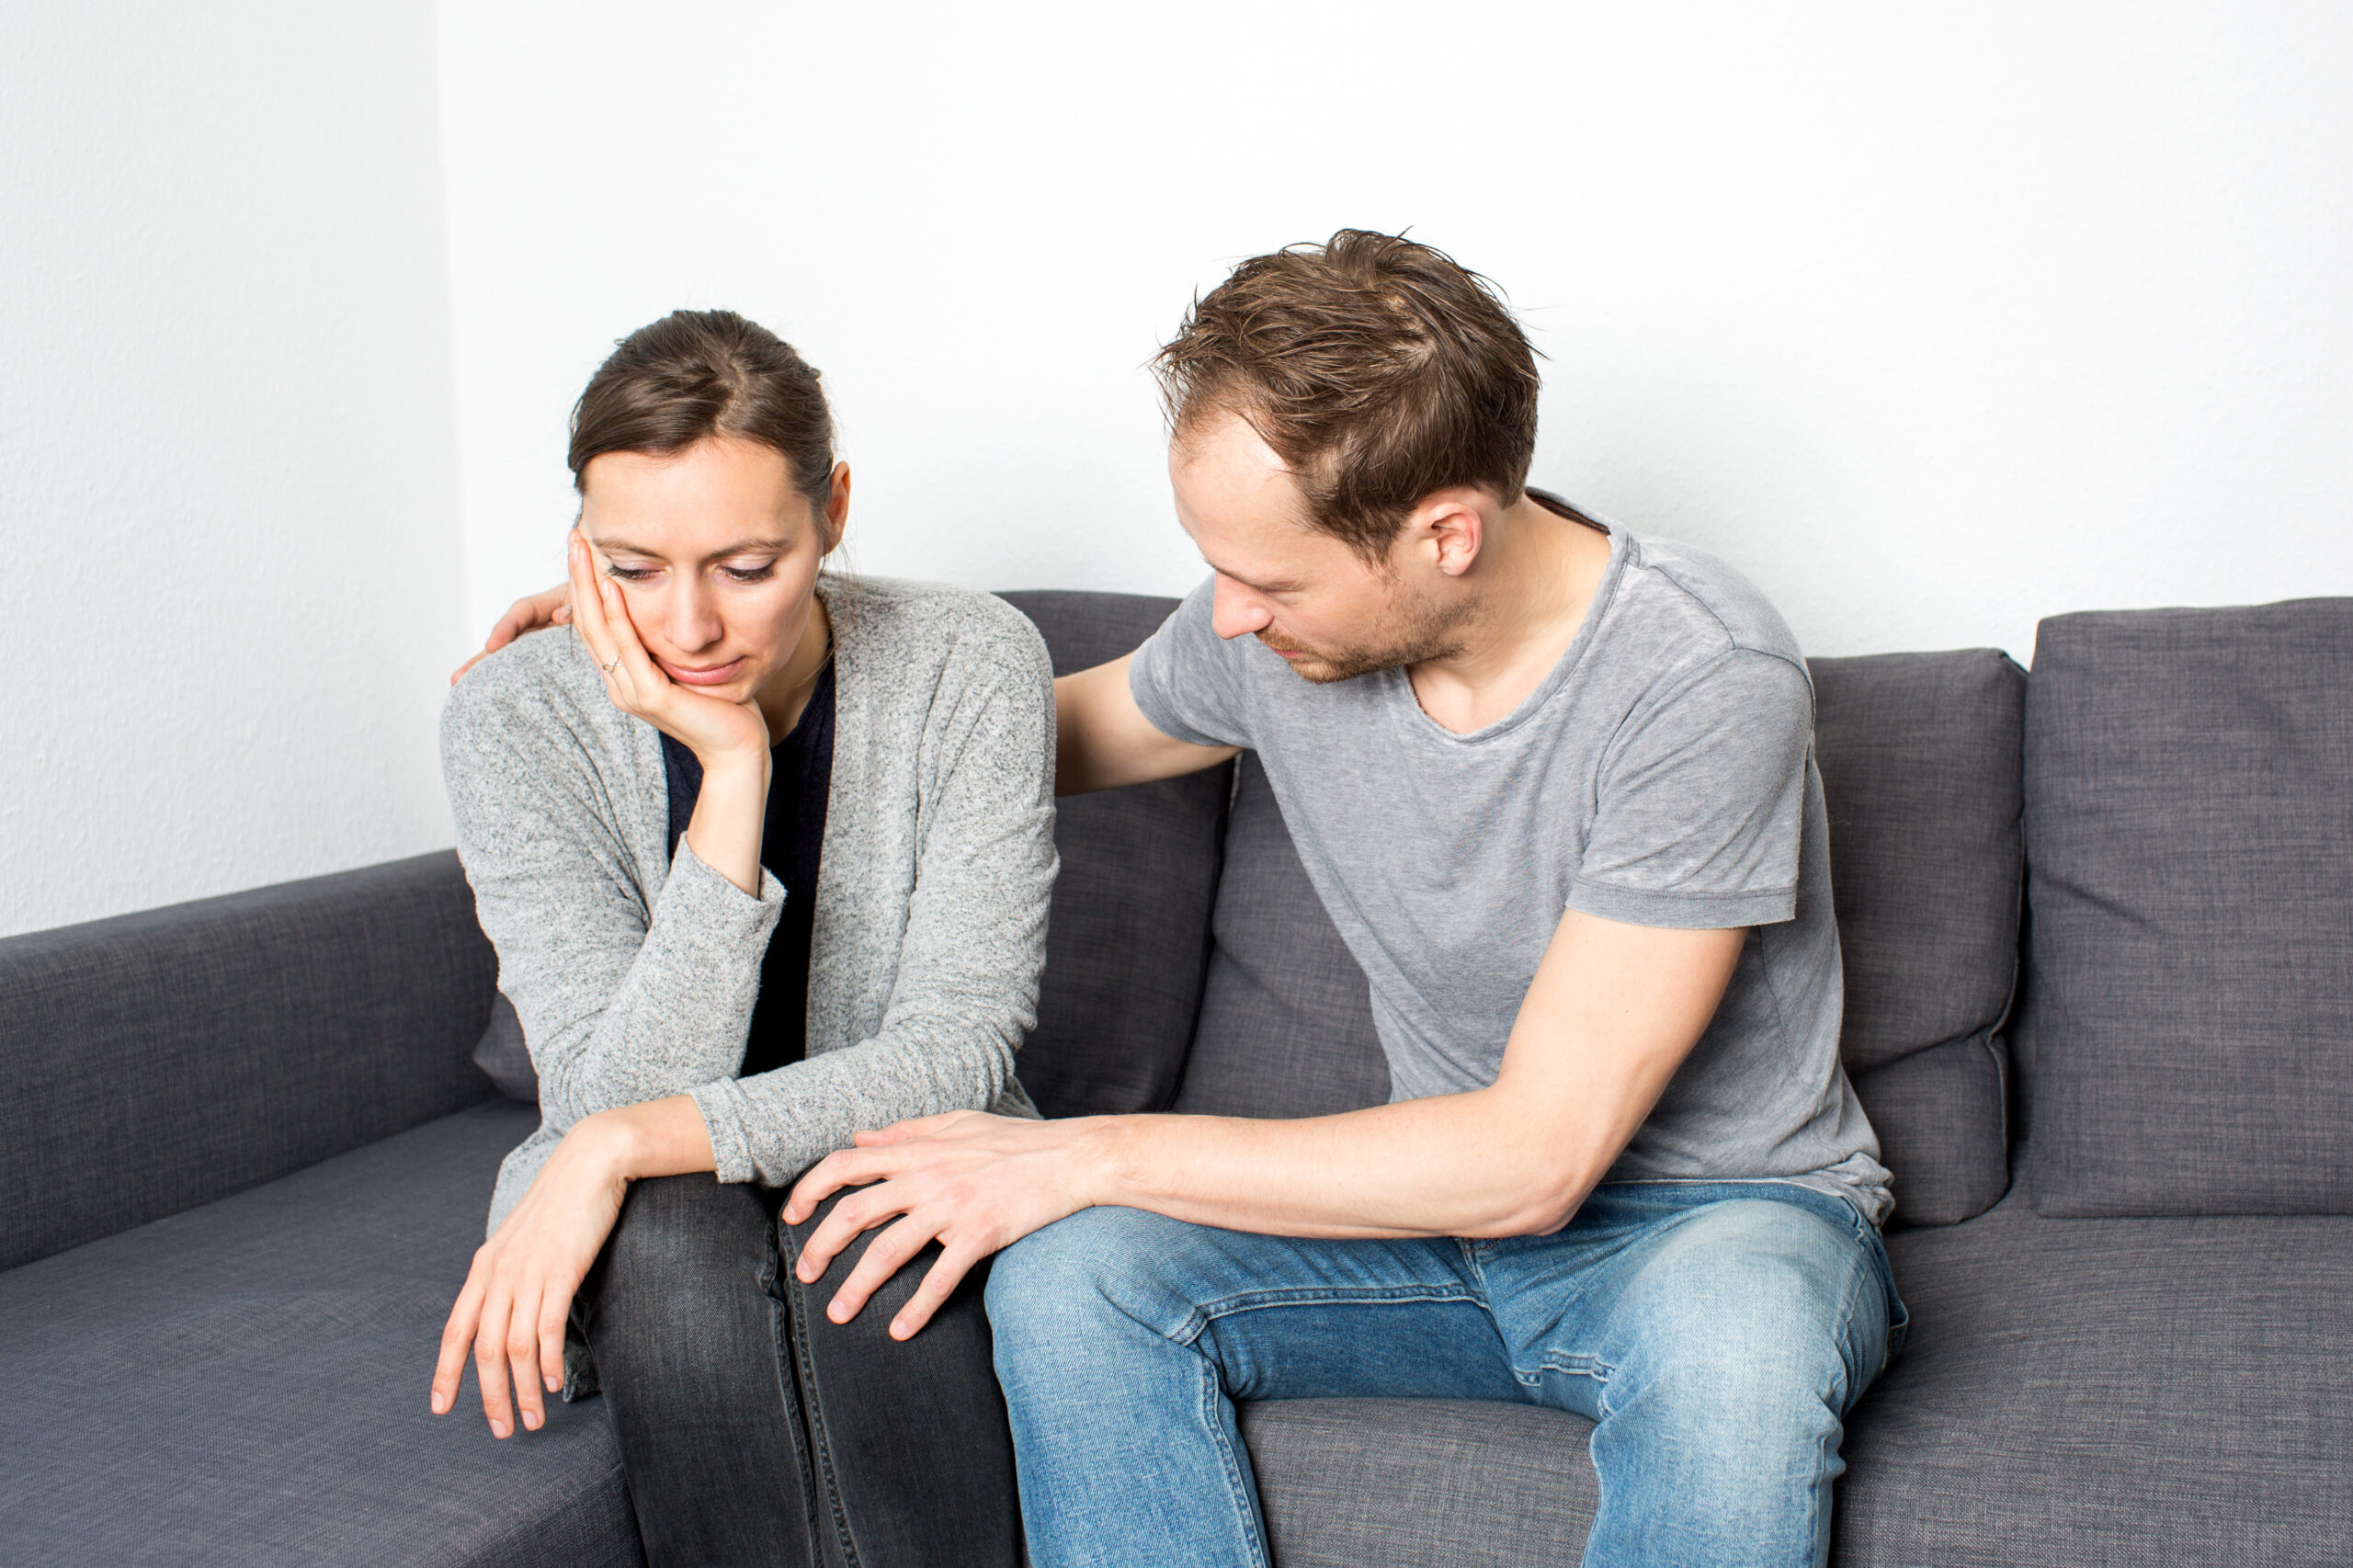 Man talking to his partner about addiction compassionately